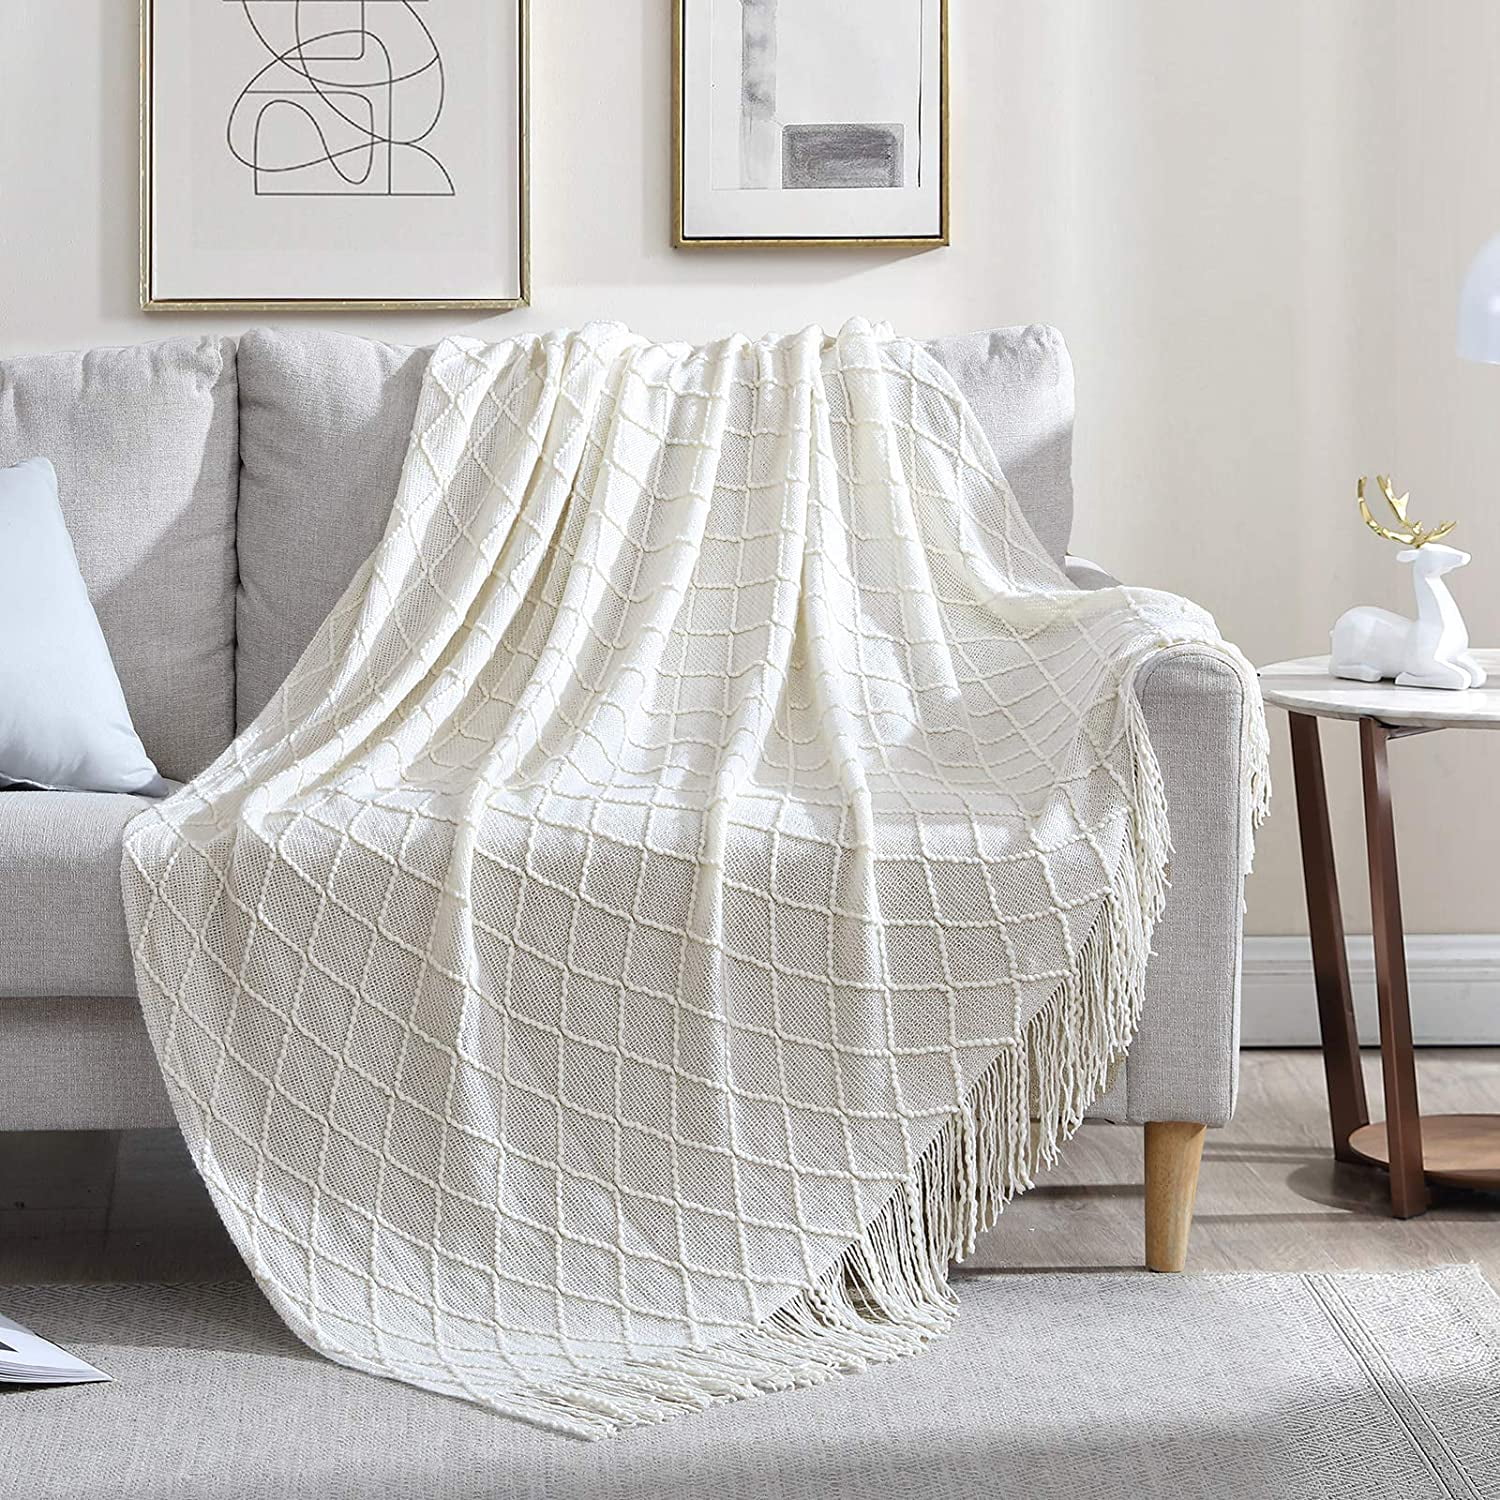 Super Soft Light Weight Throw Blanket Sky-s-a-a Summer Quilt for Bed Couch Sofa 50X40 Small